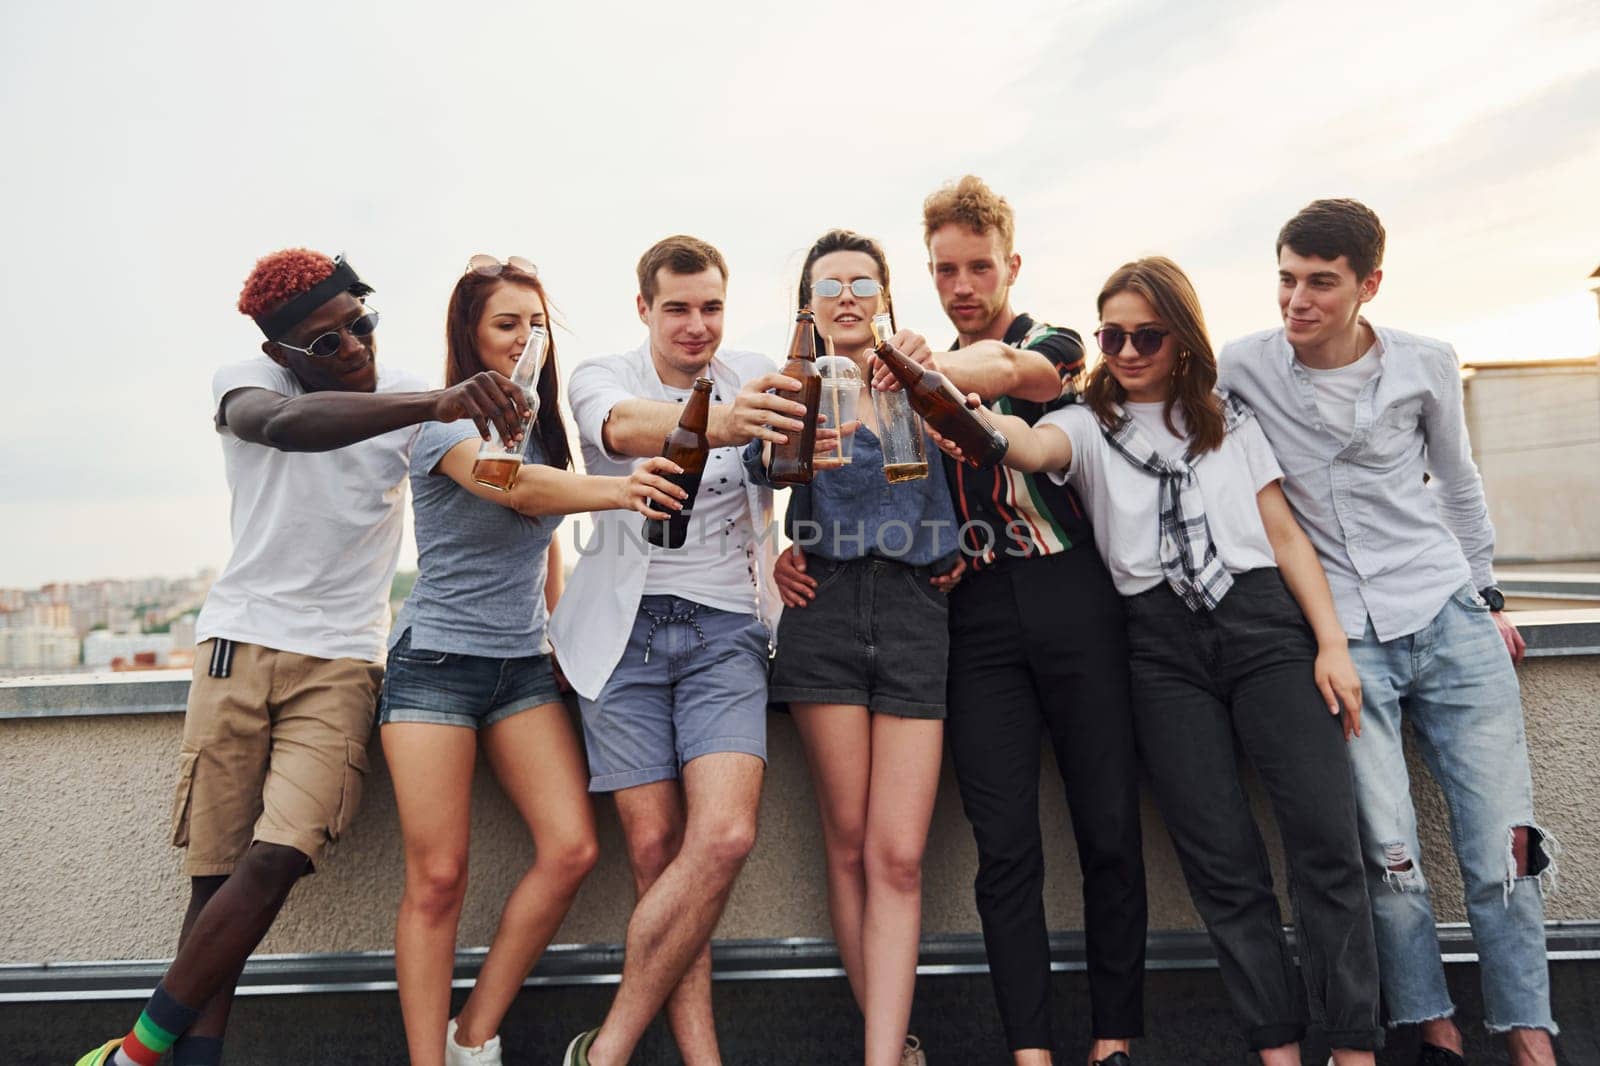 Standing with alcohol at the edge of rooftop. Group of young people in casual clothes have a party together at daytime.